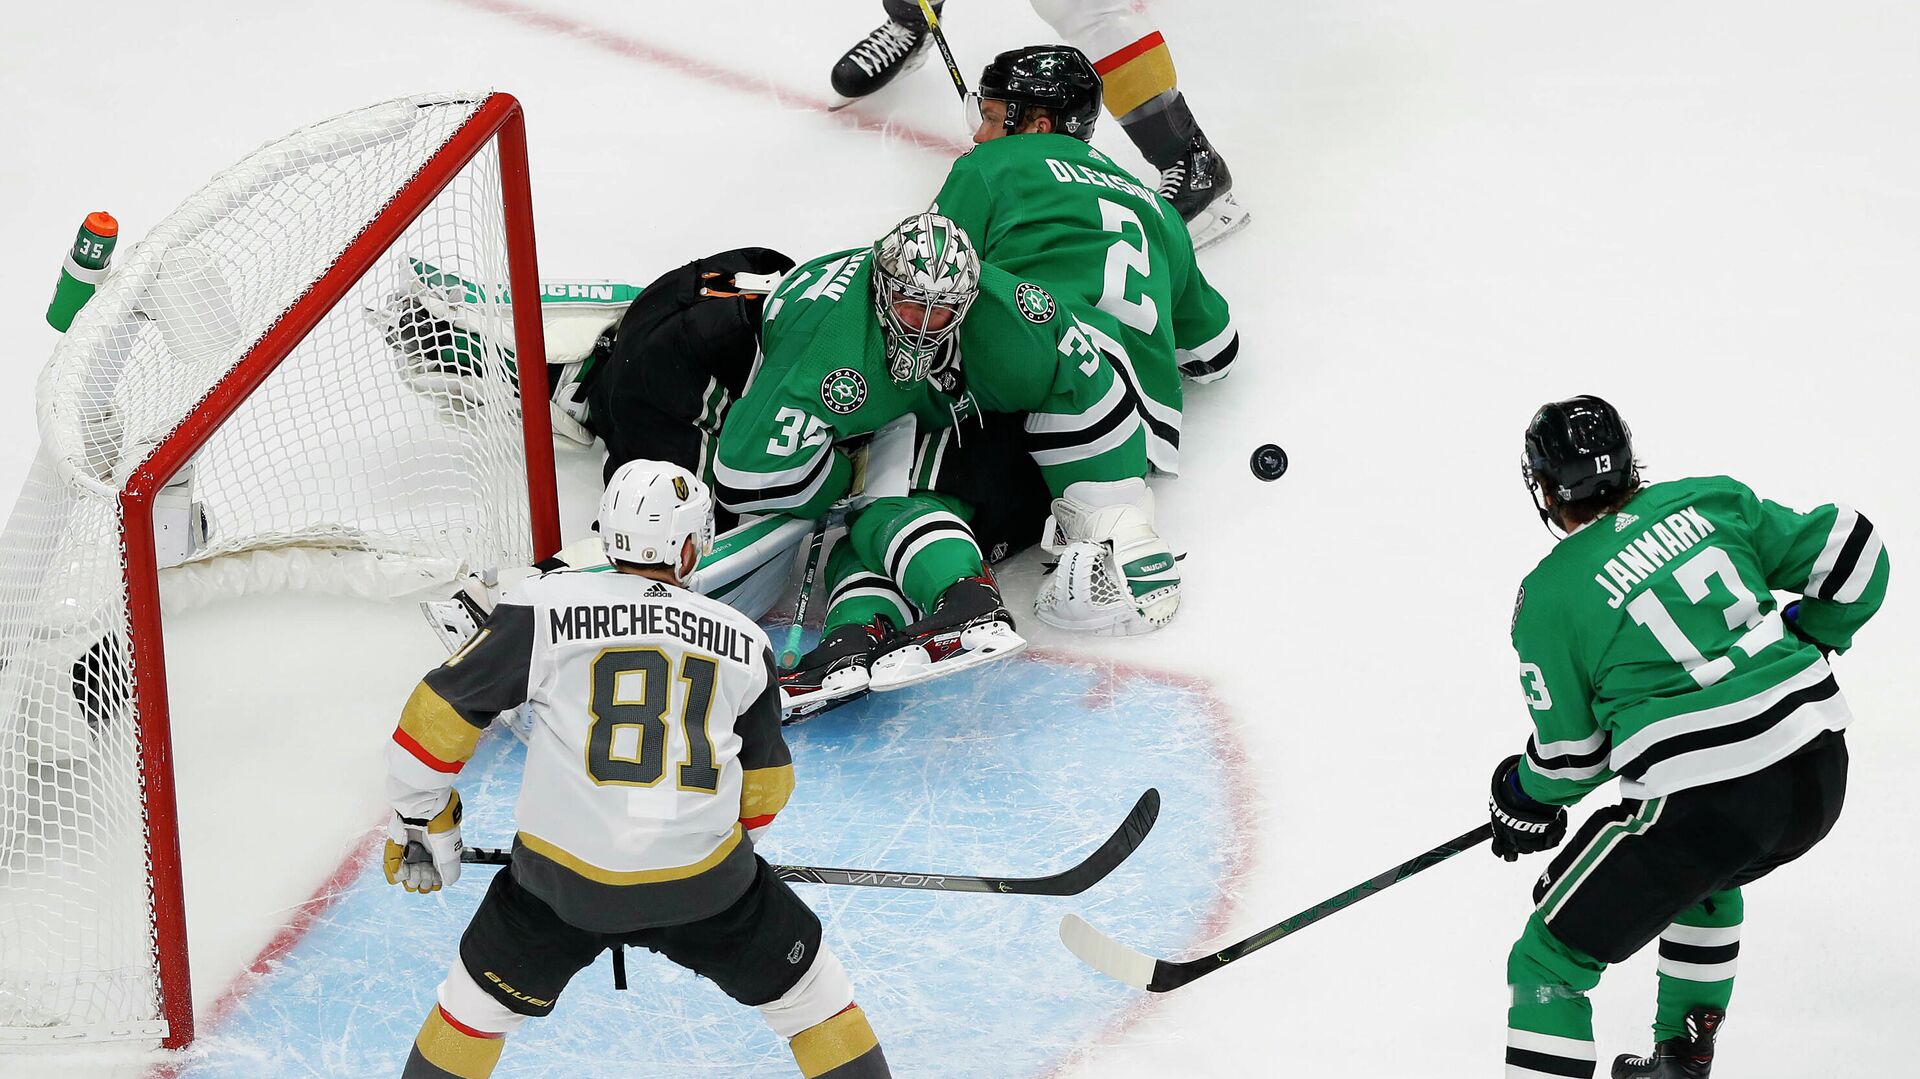 September 12, 2020; Edmonton, Alberta, CAN; Dallas Stars goaltender Anton Khudobin (35) defends the goal as center Mattias Janmark (13) provides coverage against Vegas Golden Knights center Jonathan Marchessault (81) during the second period in game four of the Western Conference Final of the 2020 Stanley Cup Playoffs at Rogers Place. Mandatory Credit: Perry Nelson-USA TODAY Sports - РИА Новости, 1920, 13.09.2020